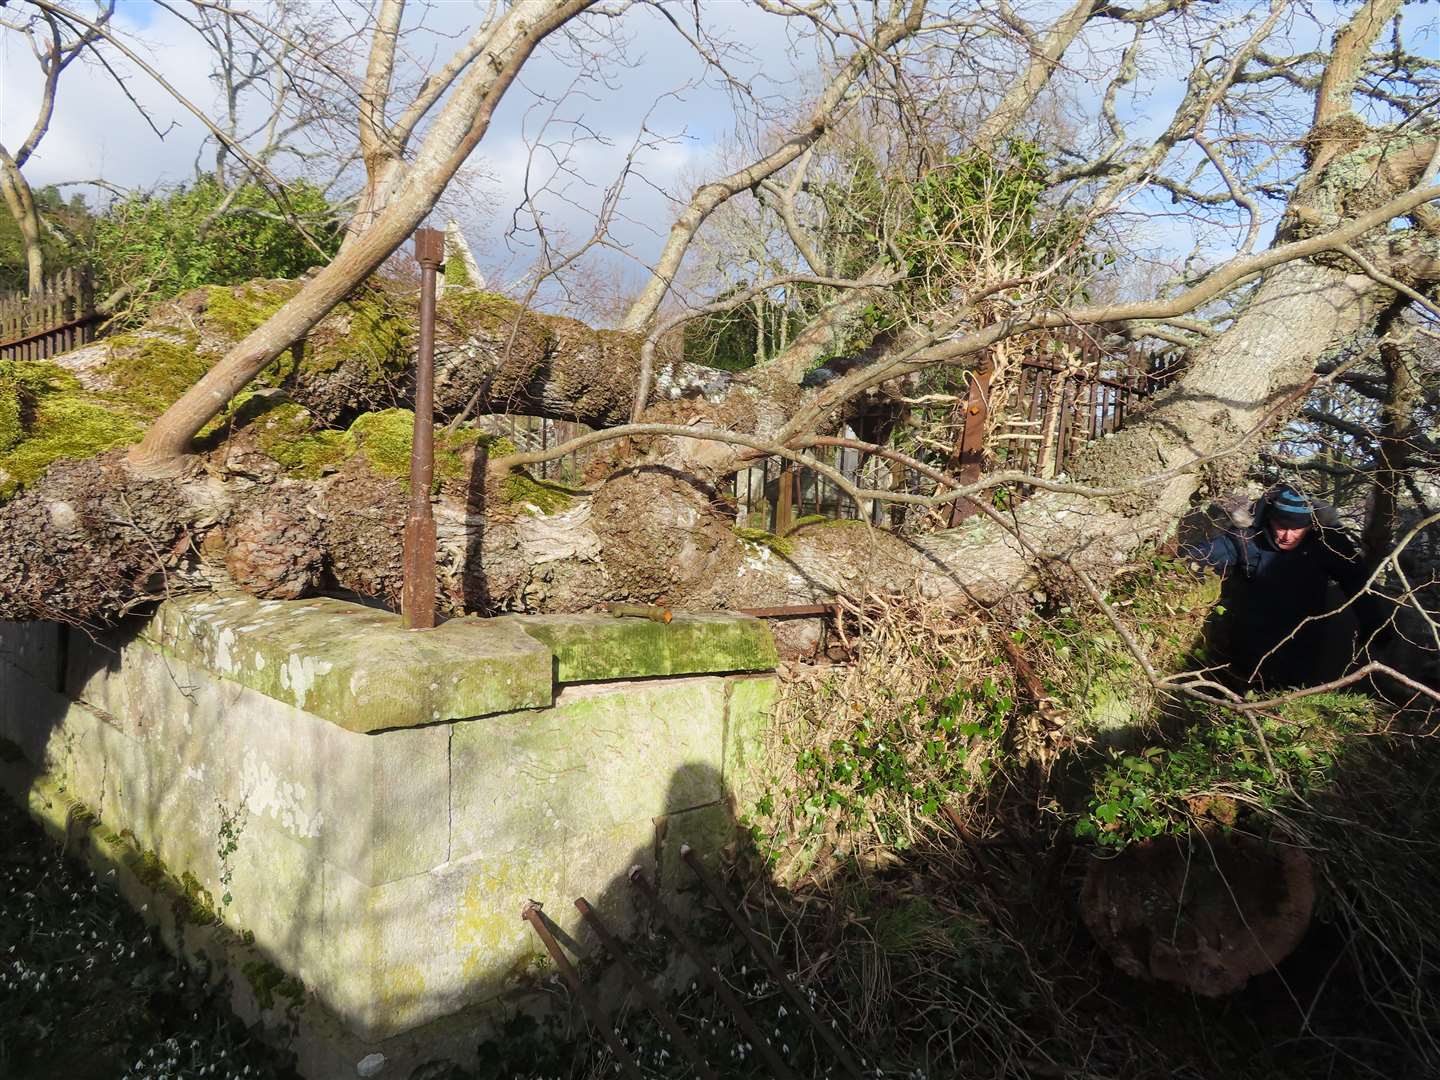 Two 15m high wynch elms crashed down on top of an enclosure inside the cemetery.